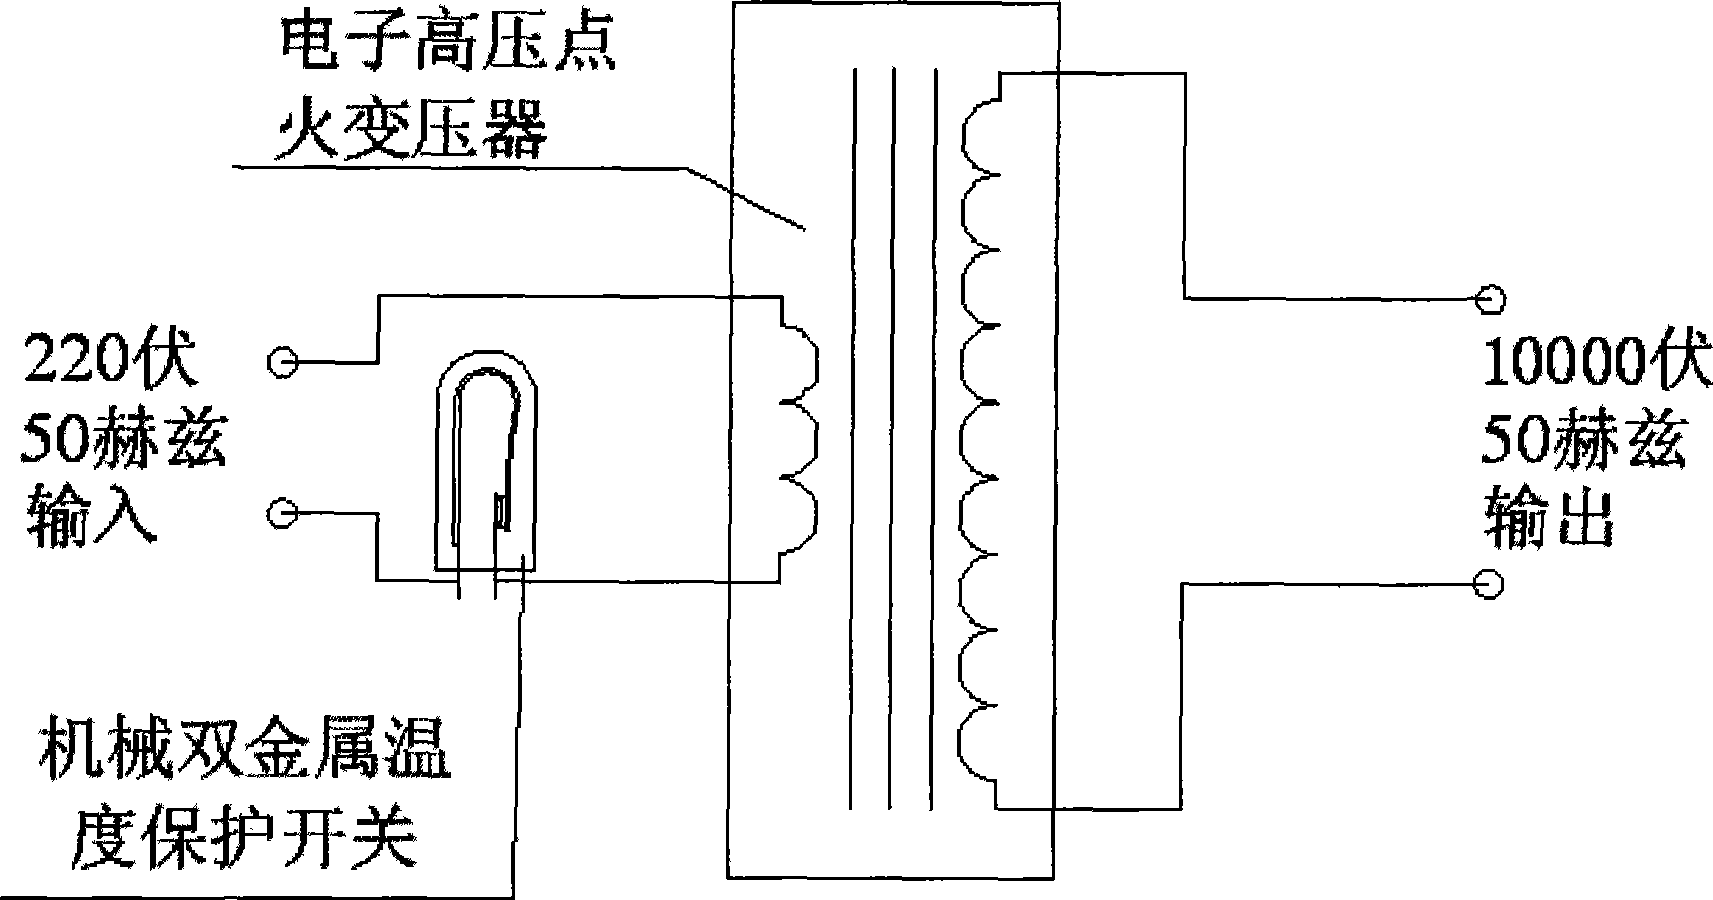 High-pressure electronic igniter with mechanical temperature protection